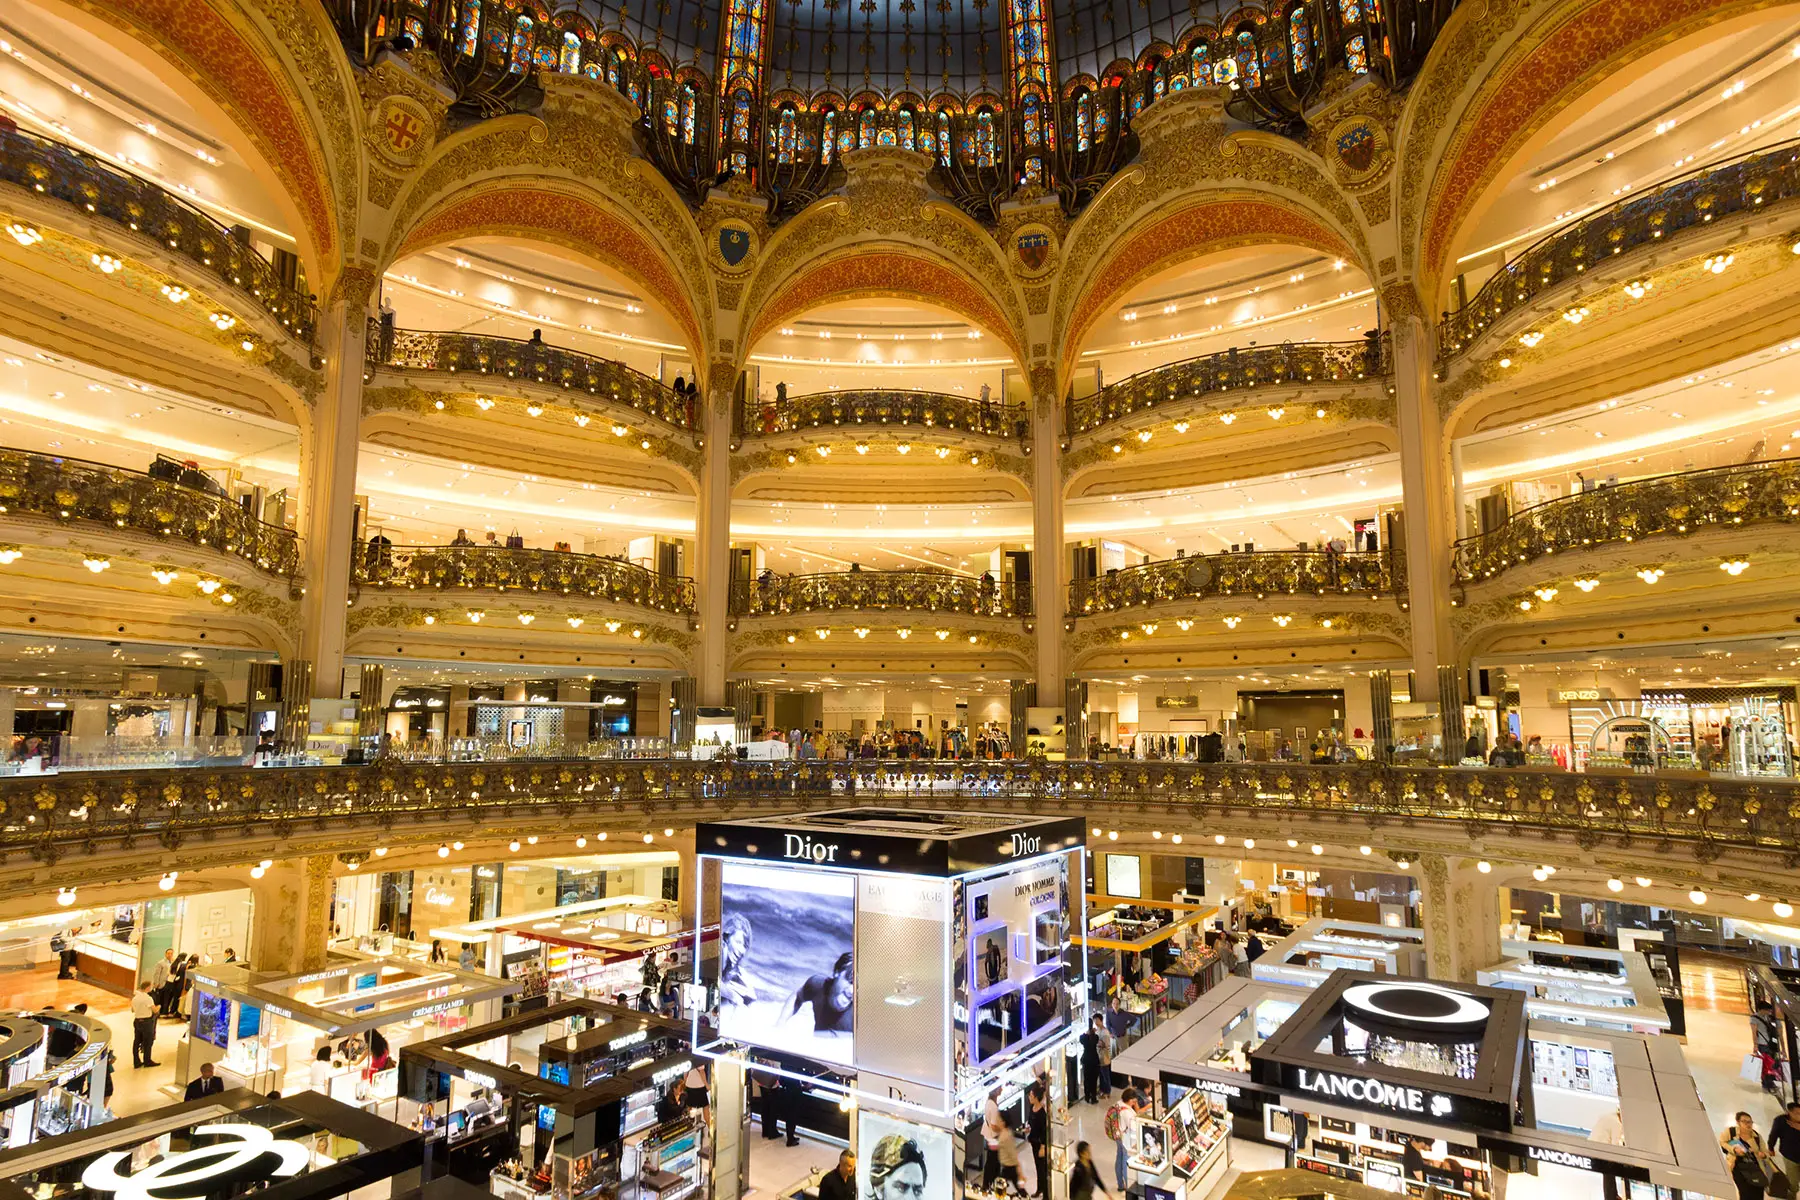 Shopping at a Galeries Lafayette location in Paris, France